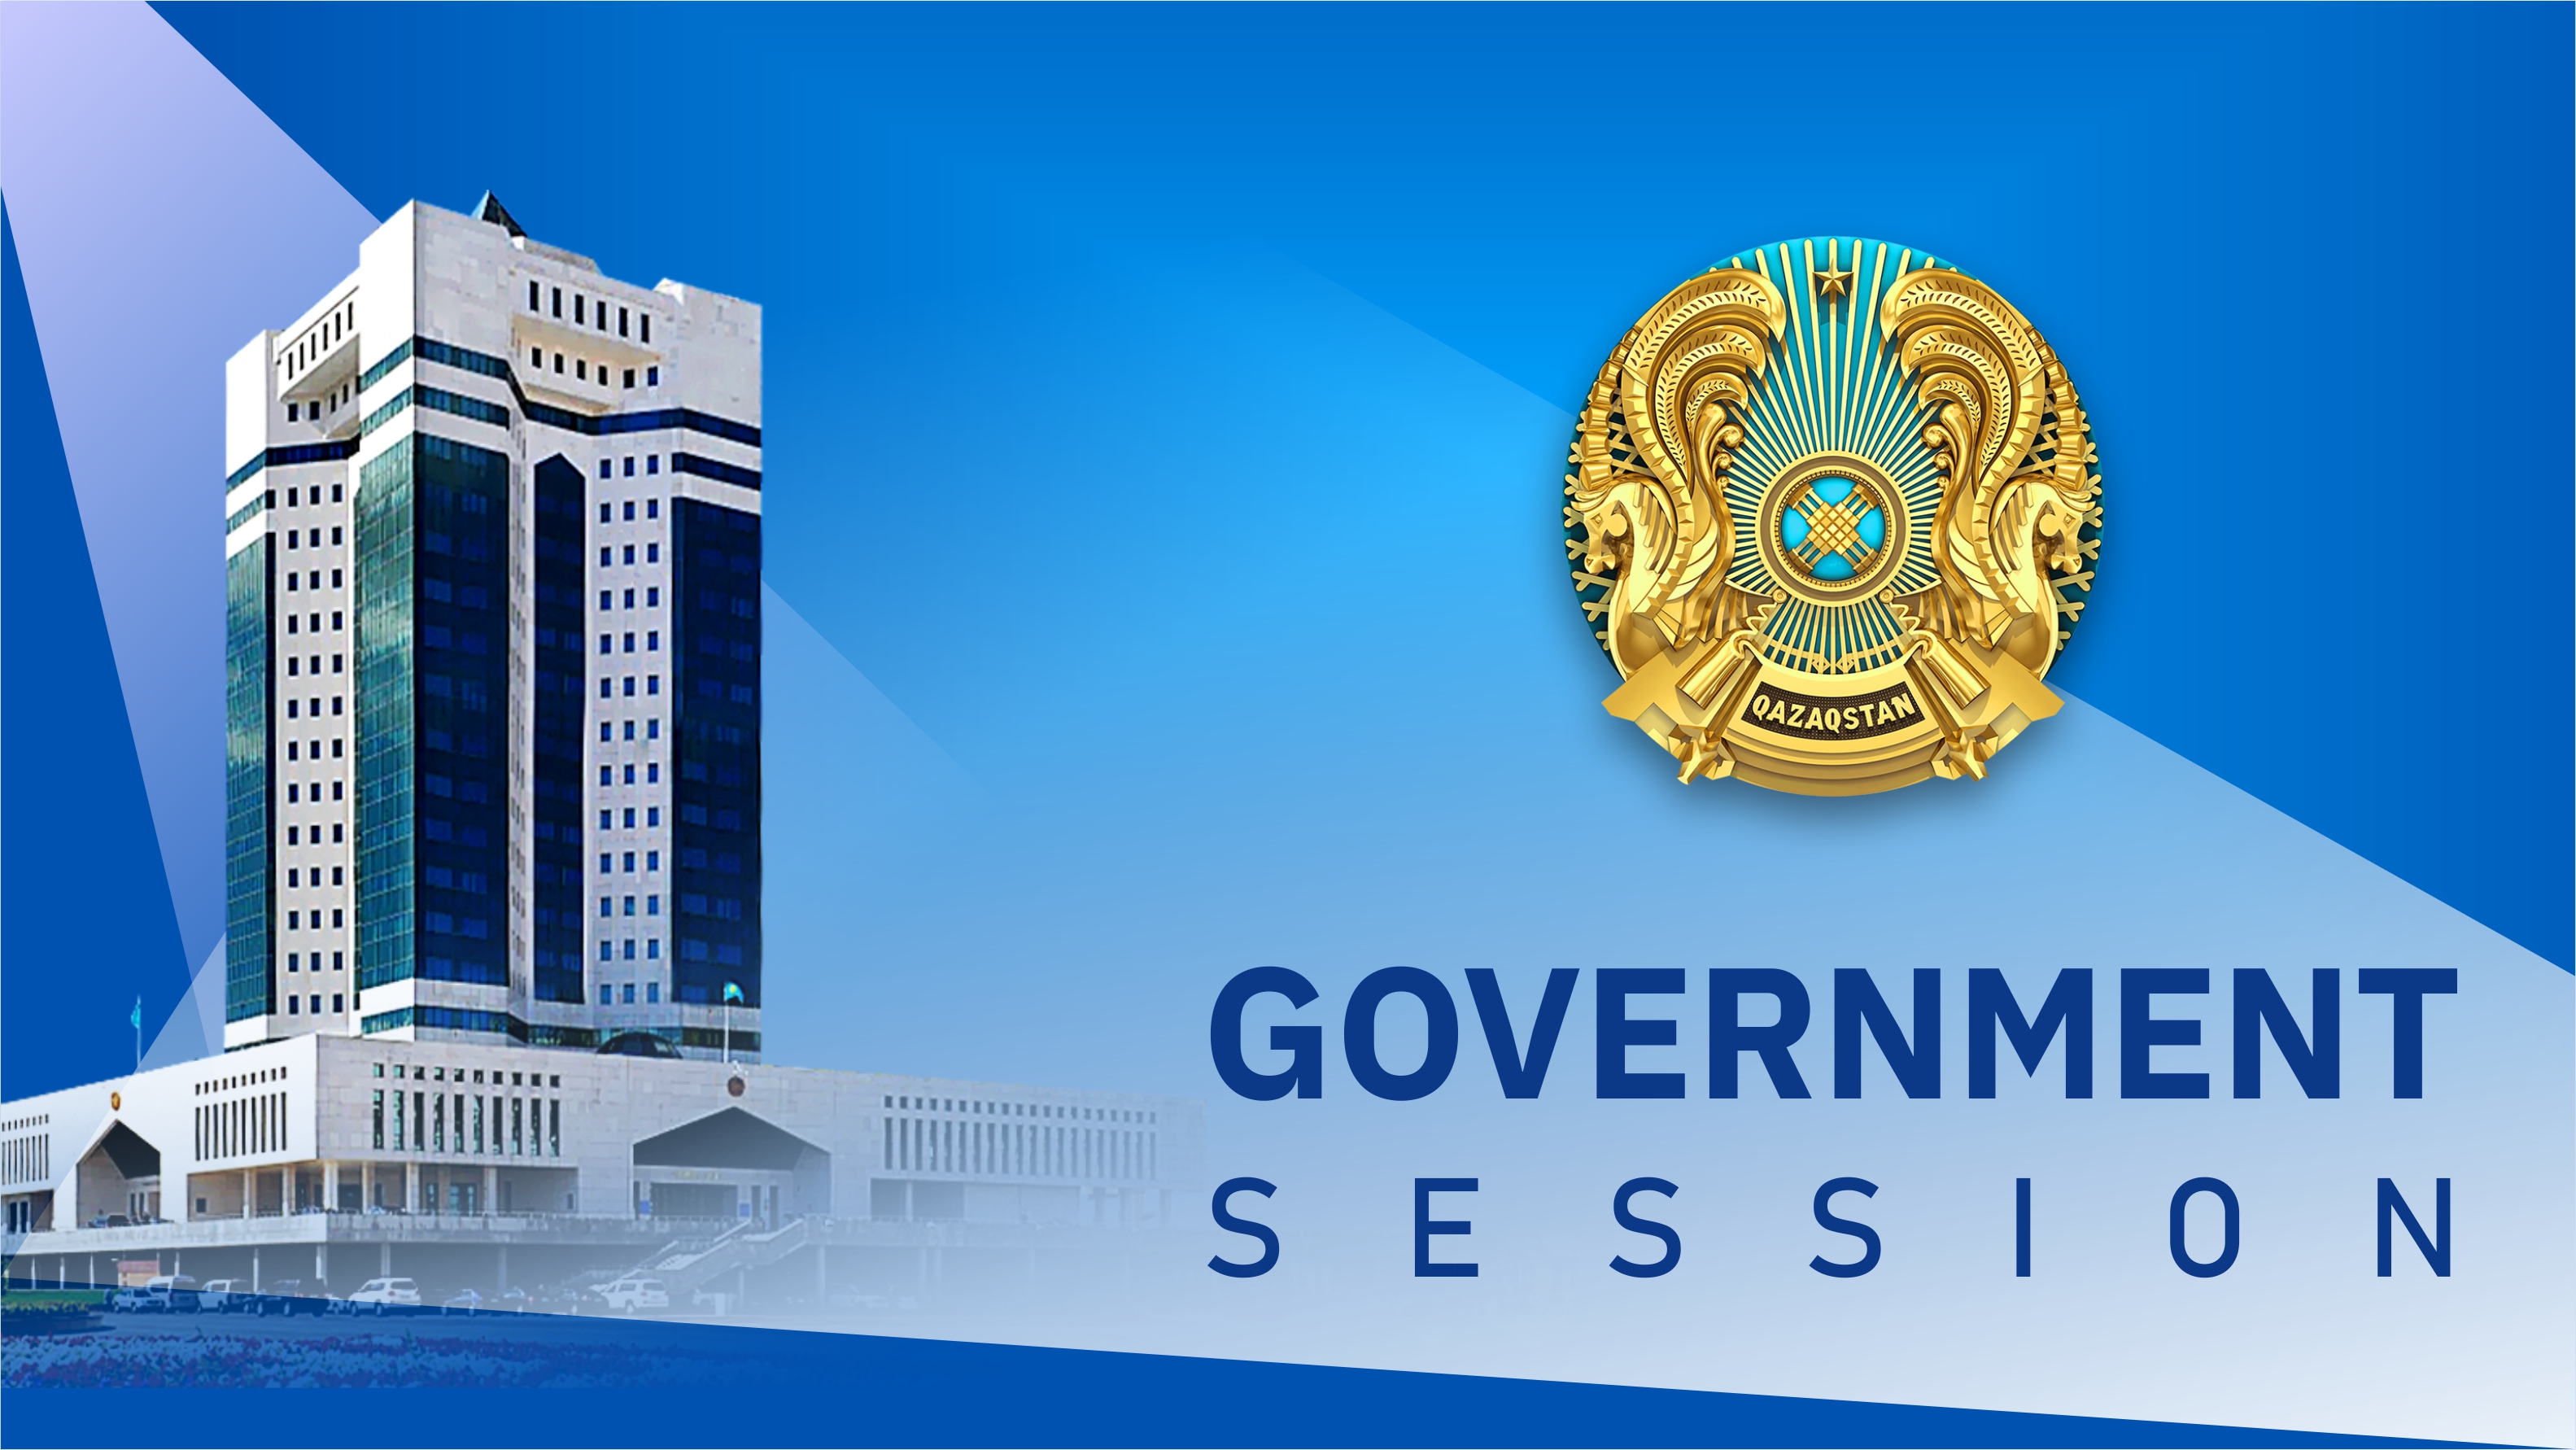 Government session to be held Jan. 14 in Ukimet Uyi